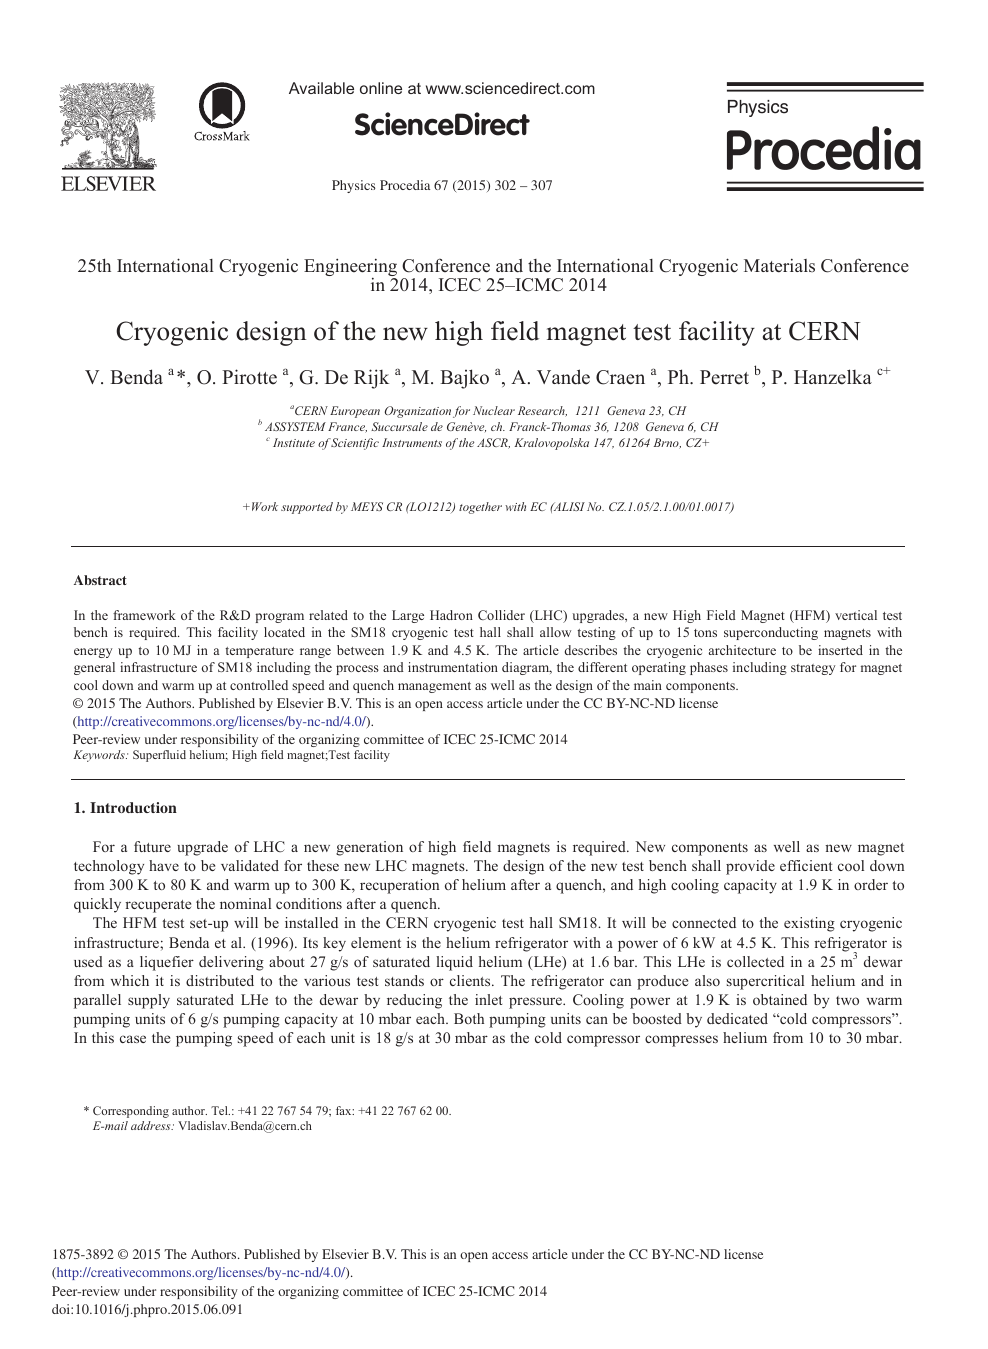 Cryogenic Design Of The New High Field Magnet Test Facility At Cern Topic Of Research Paper In Earth And Related Environmental Sciences Download Scholarly Article Pdf And Read For Free On